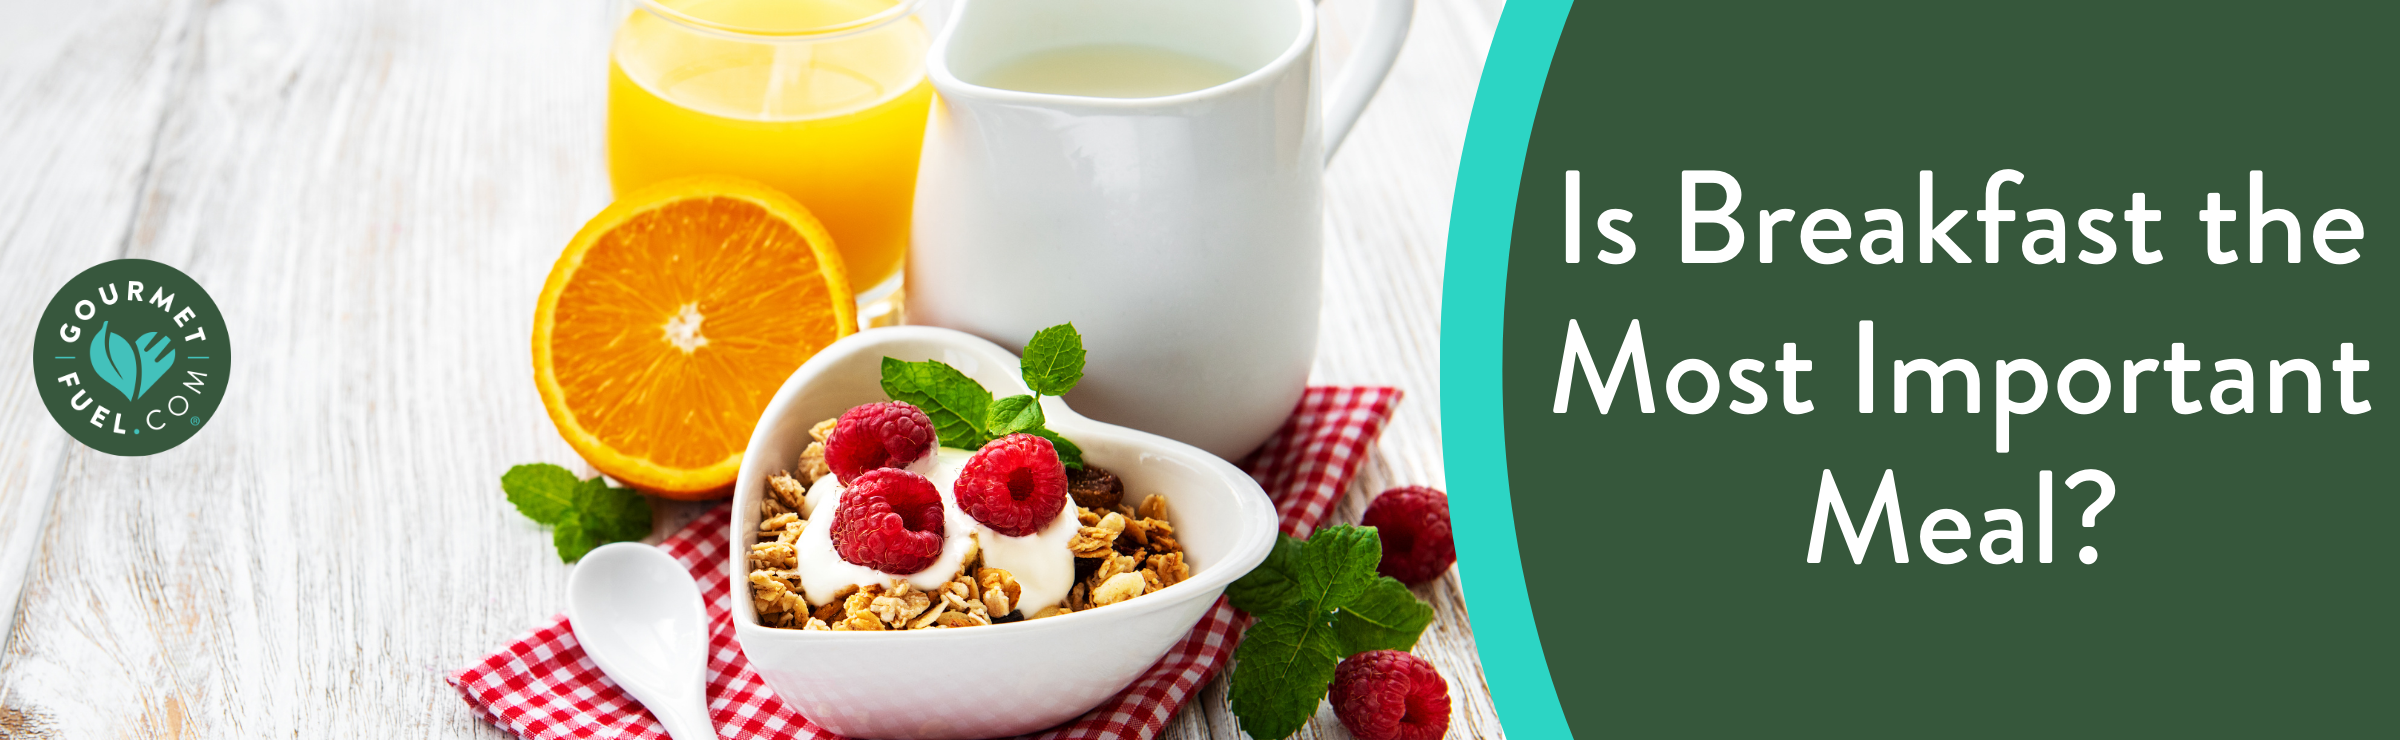 Is Breakfast the Most Important Meal? - GourmetFuel